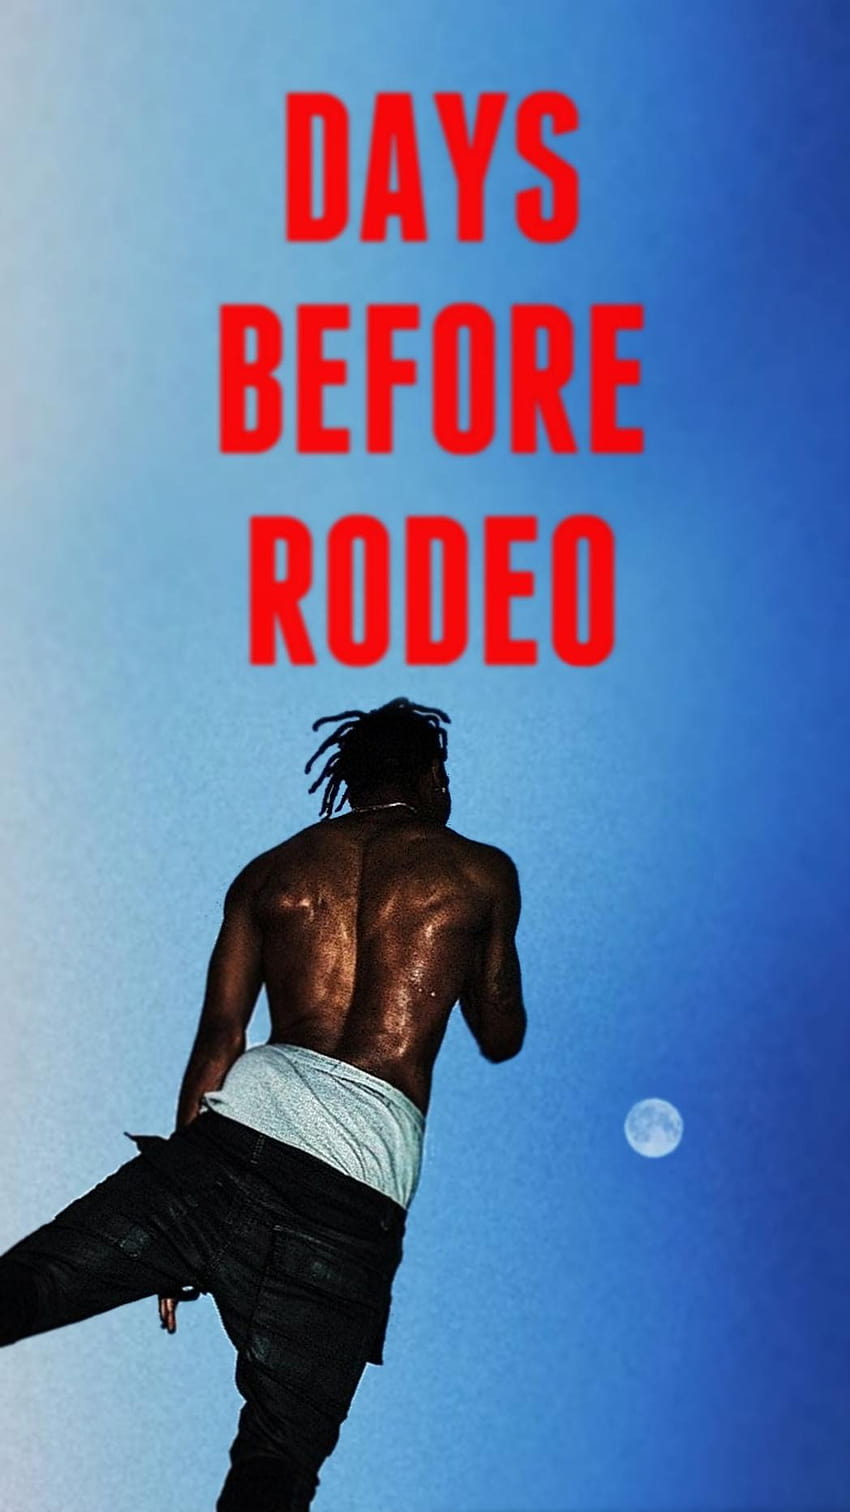 Here's a new for the DBR fans : travisscott, days before rodeo HD phone wallpaper